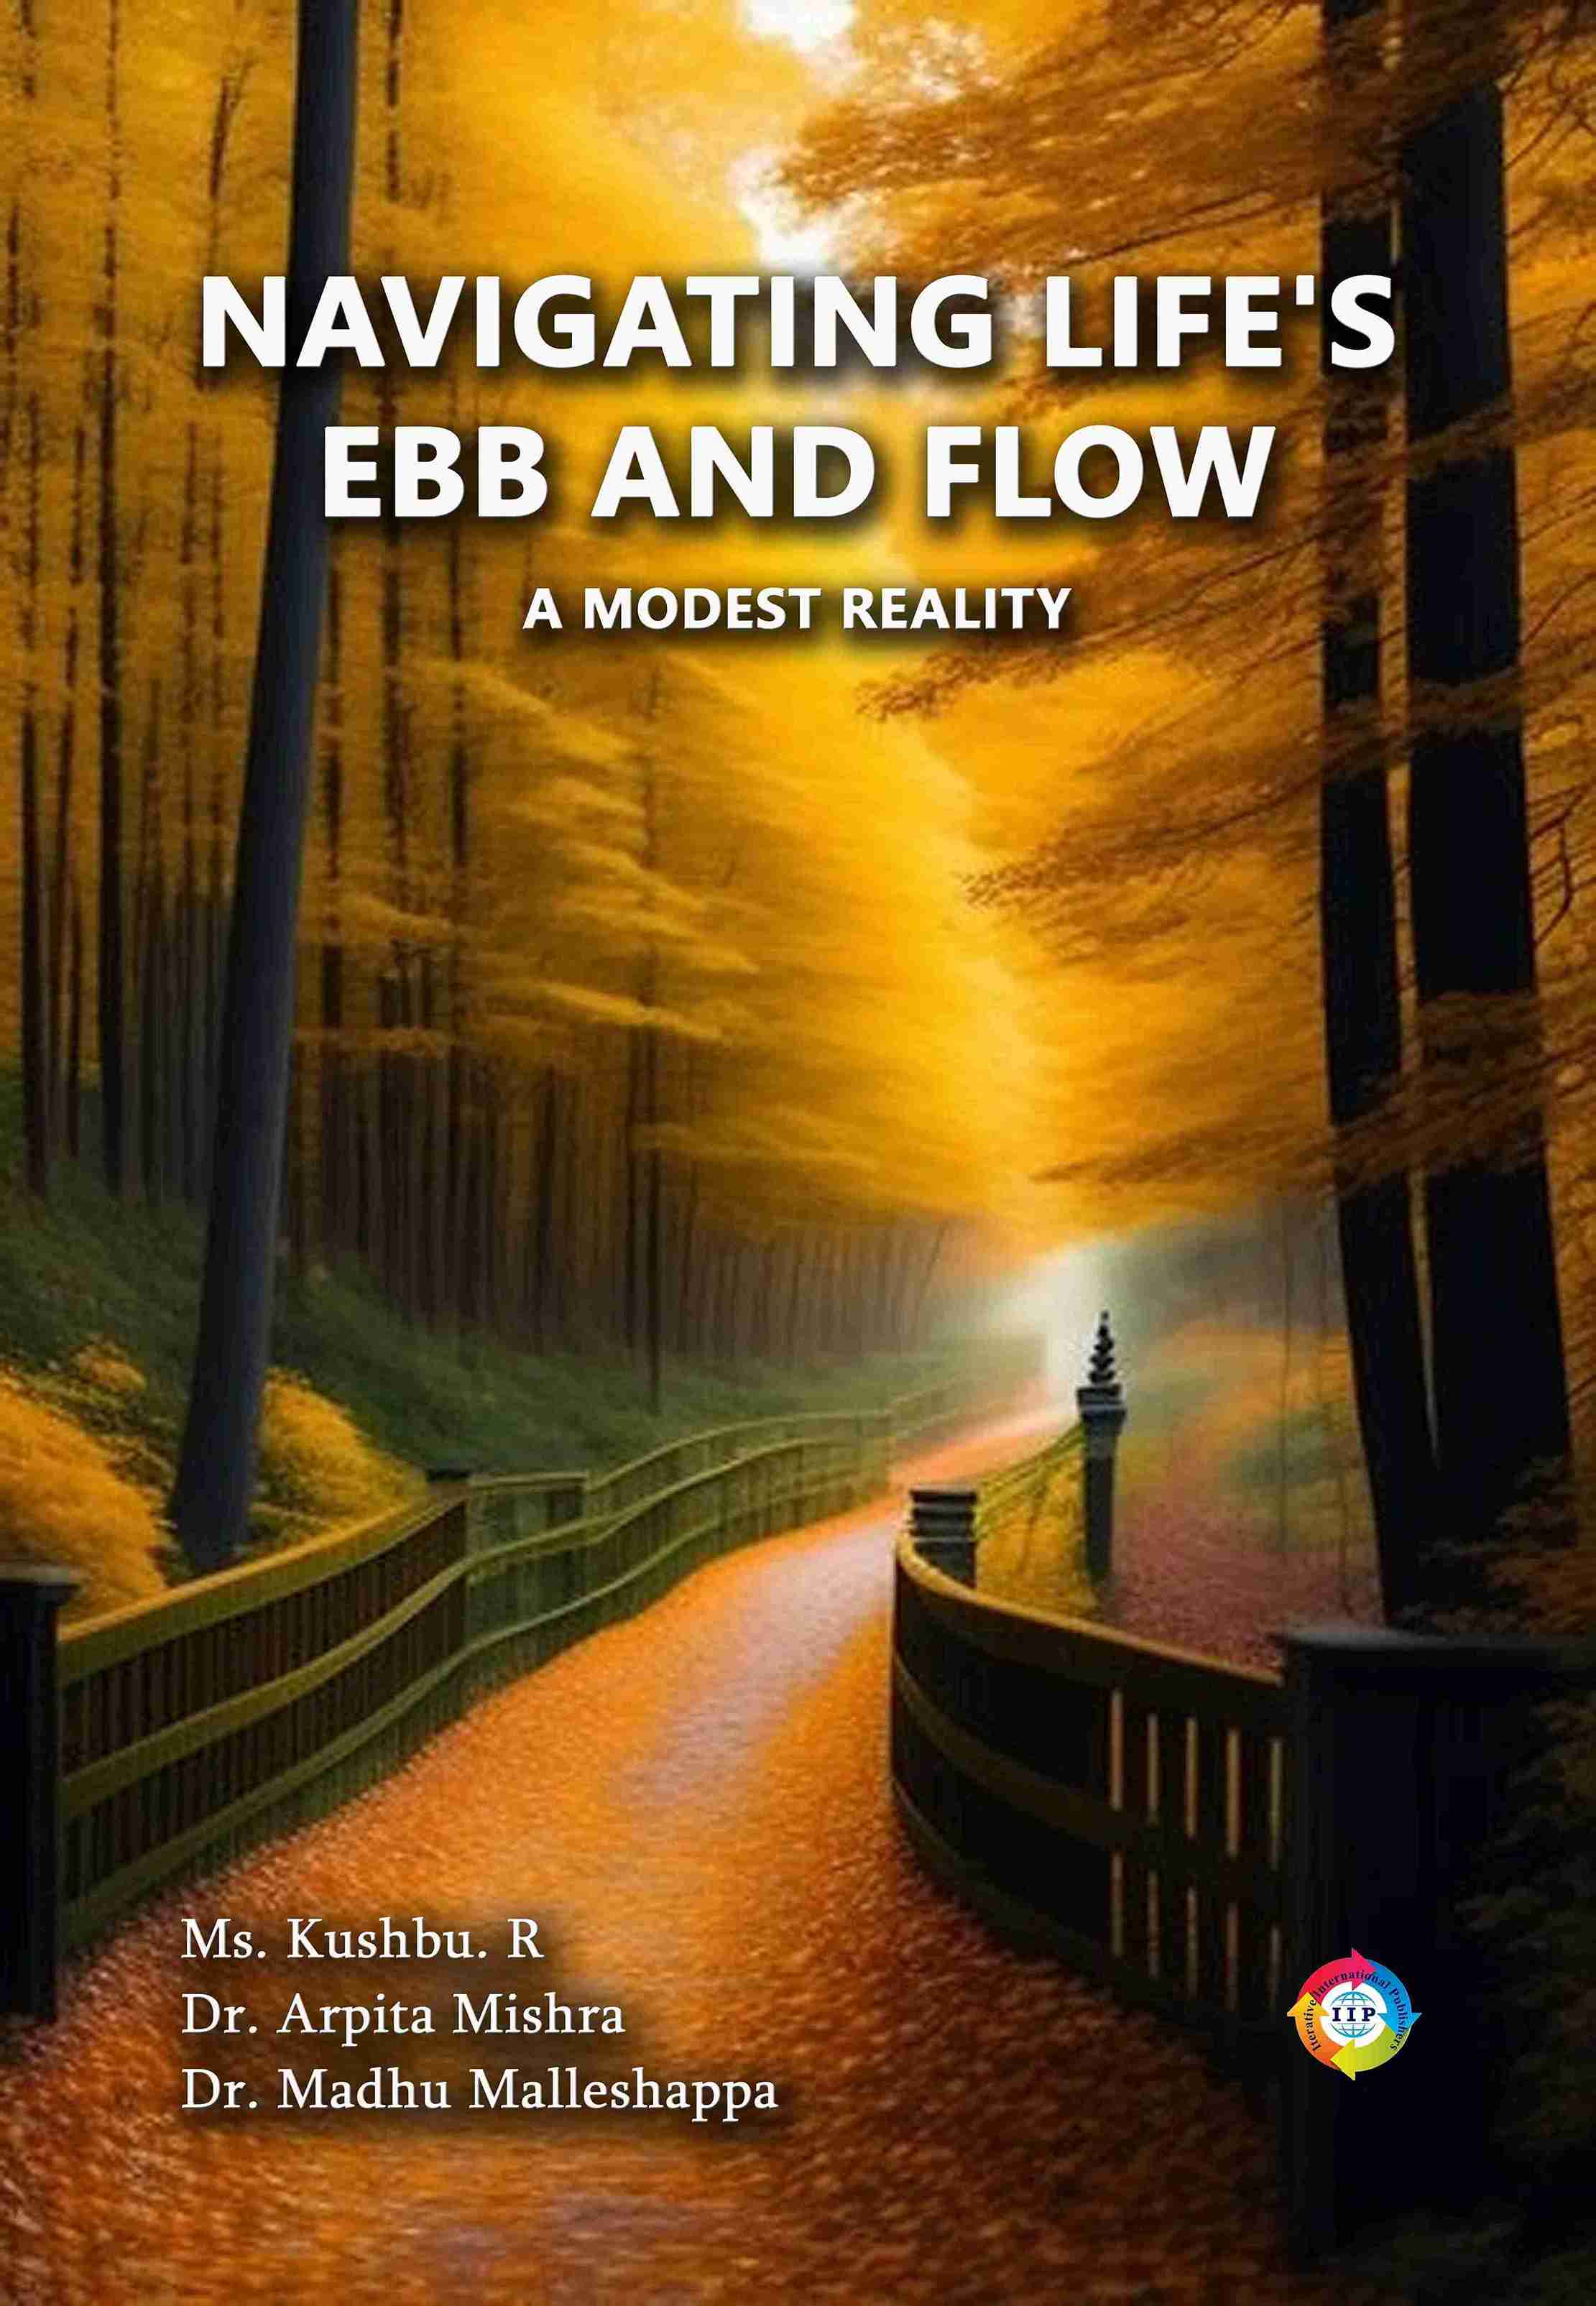 Navigating Life's Ebb and Flow- A Modest reality